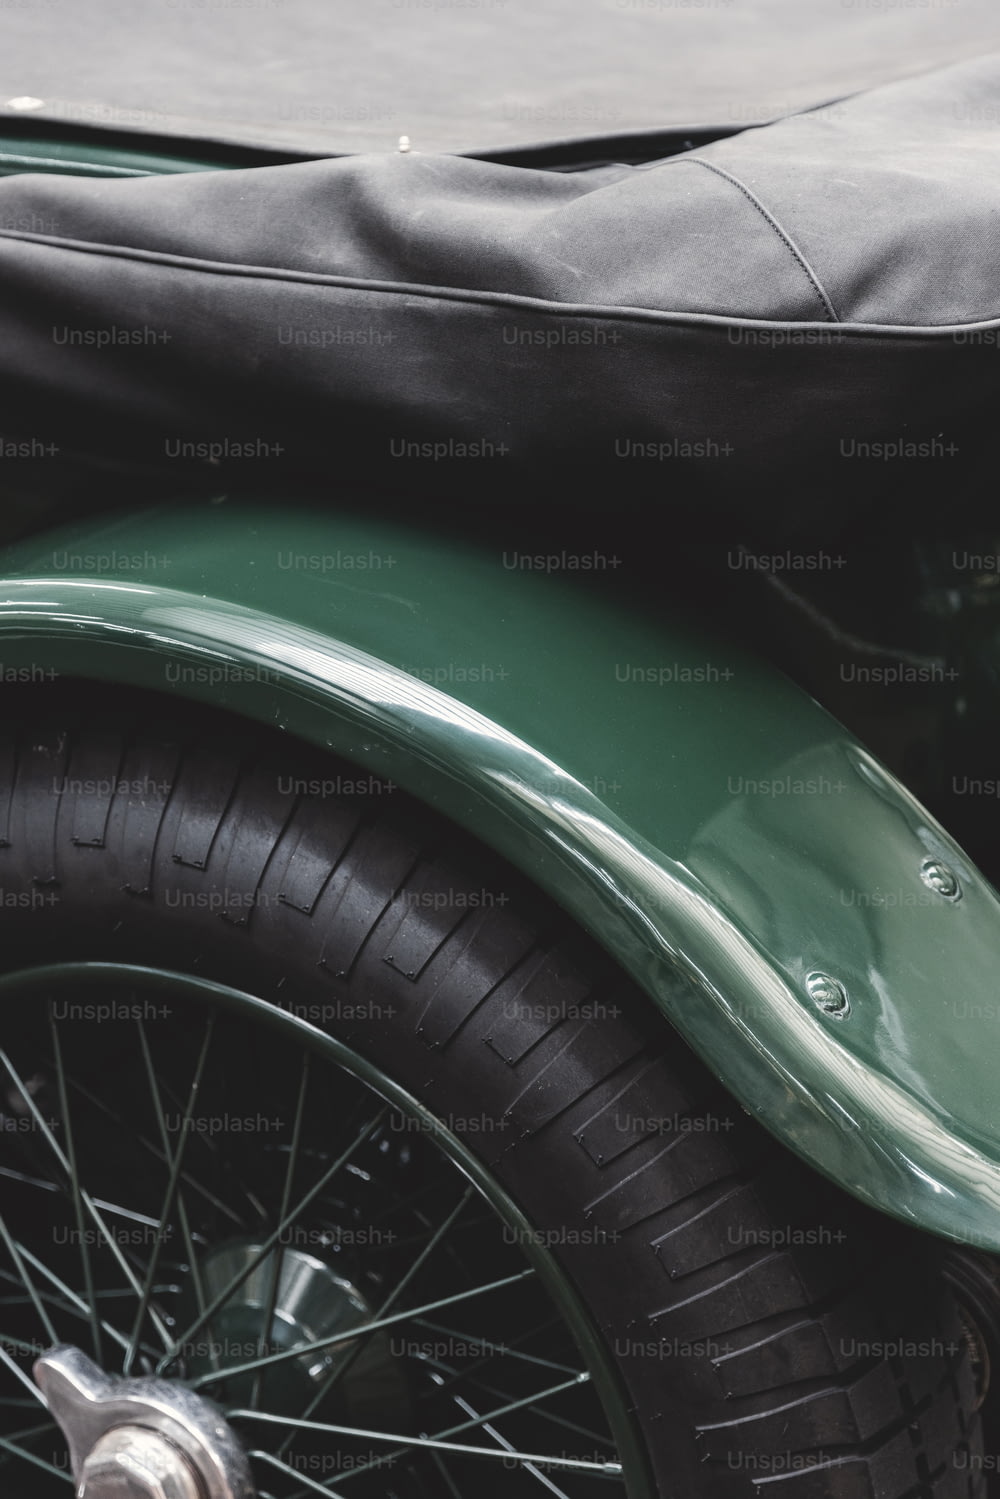 a close up of a motorcycle with a bag on the back